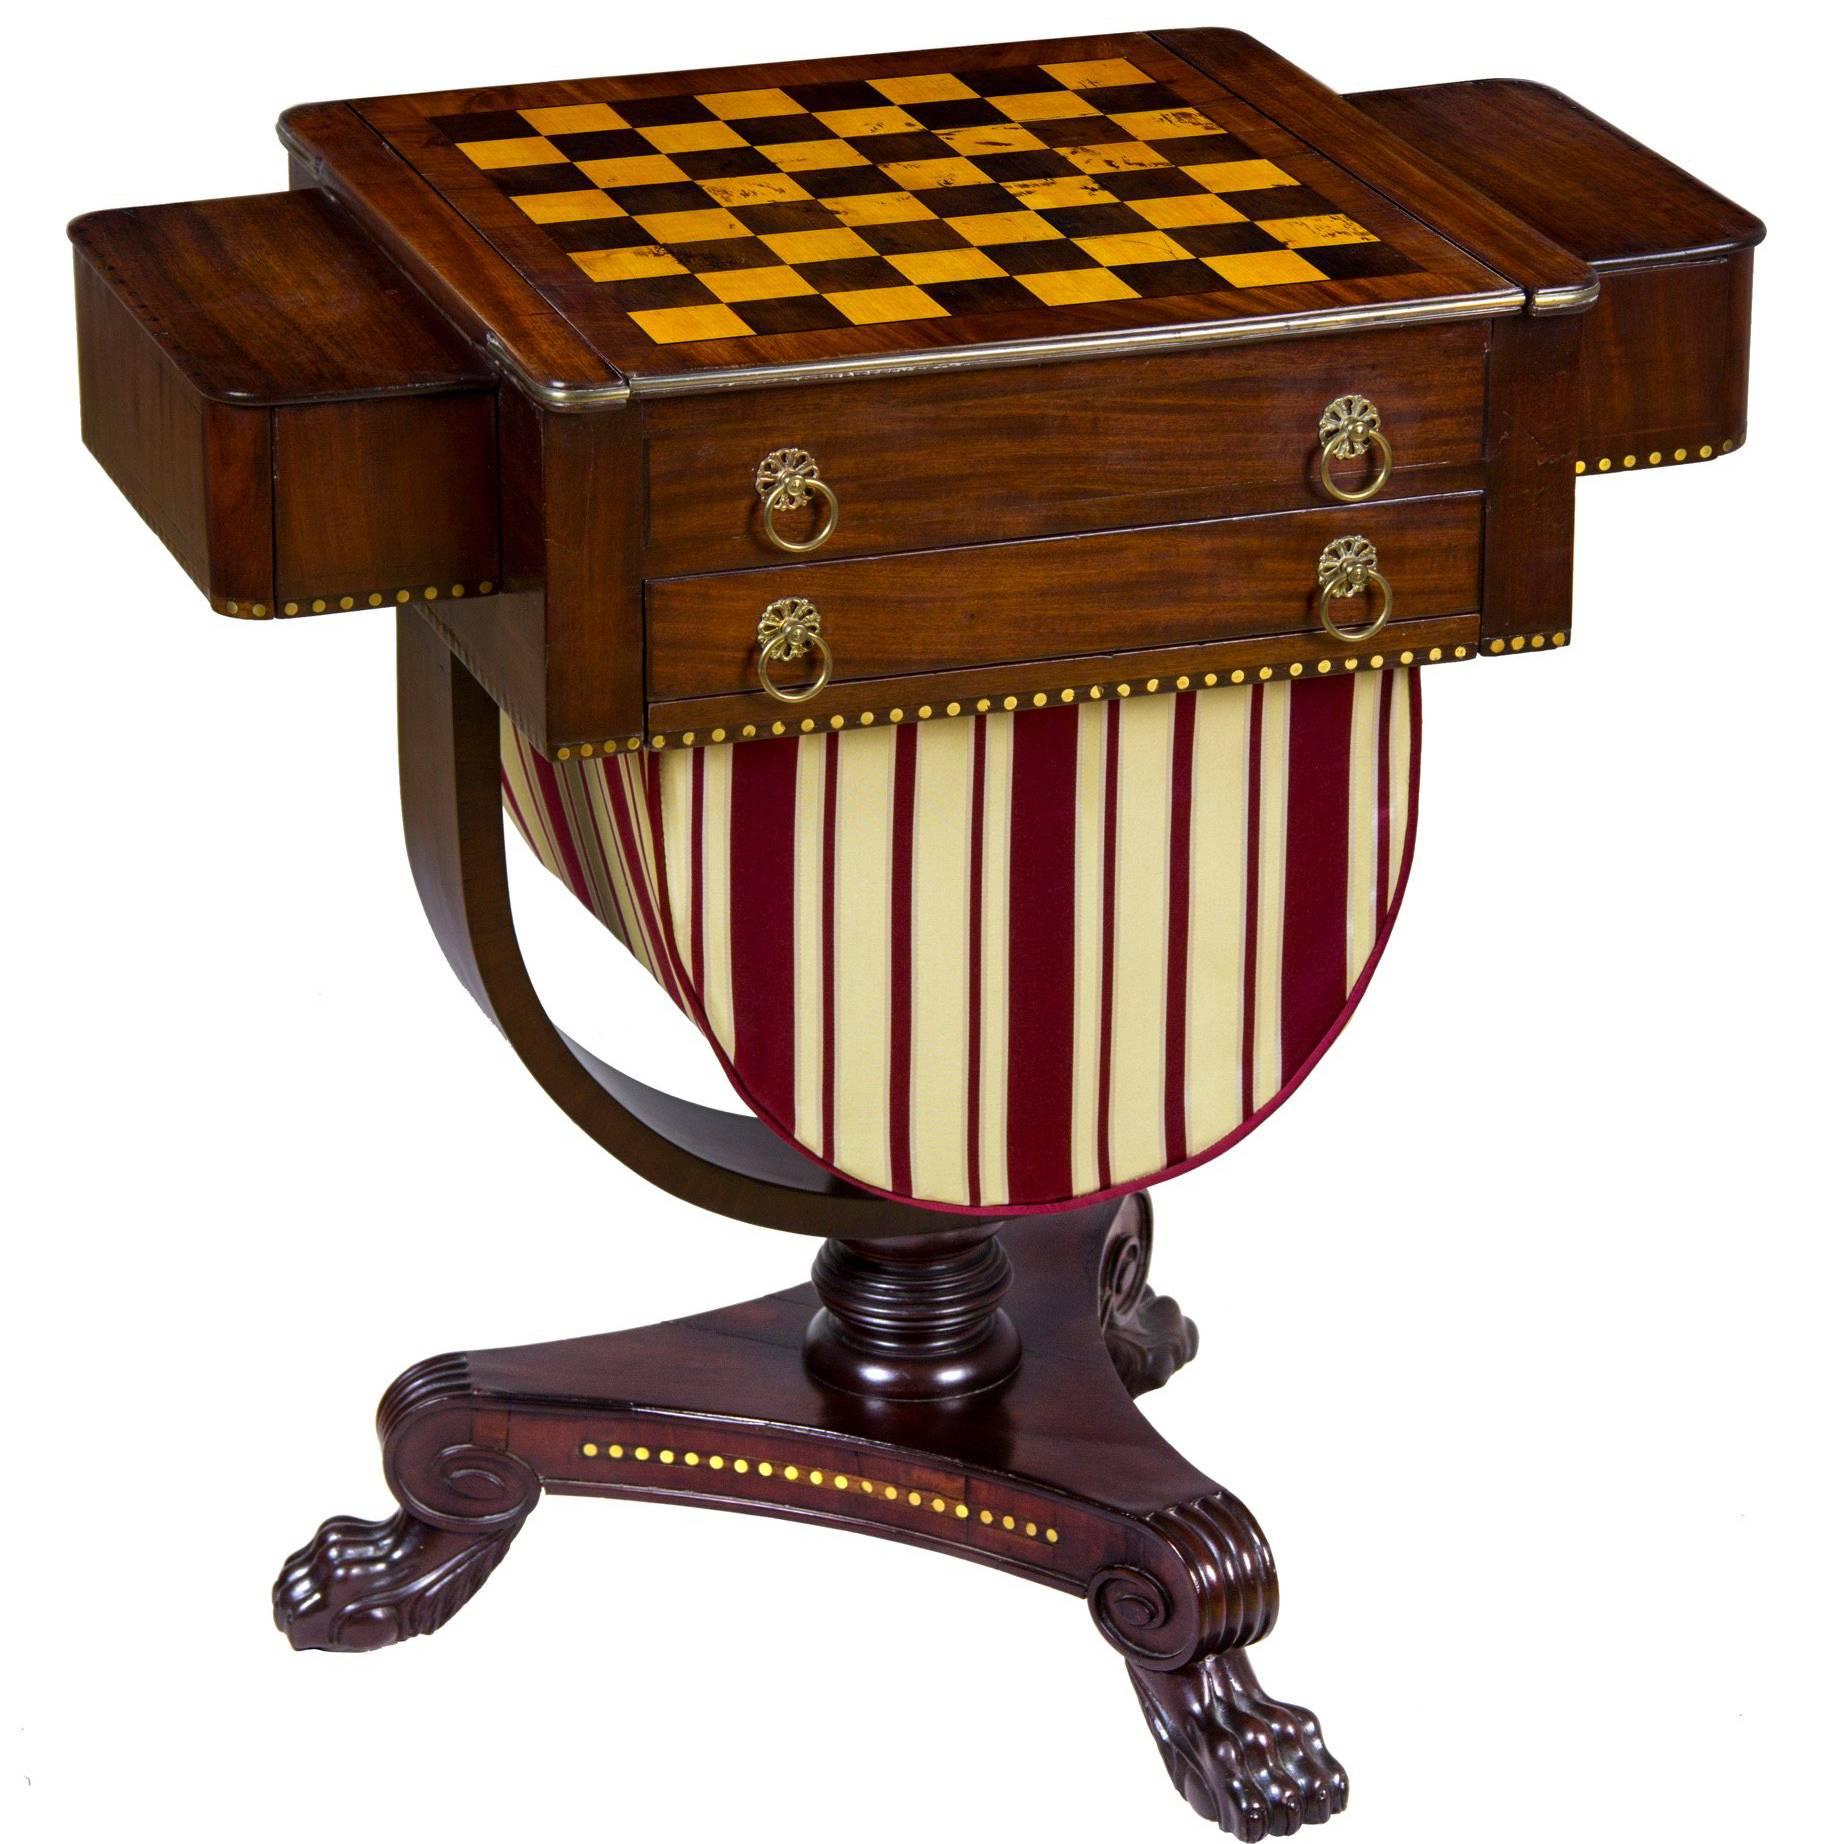 Classical Brass Inlaid Mahogany Worktable with Inlaid Game Board circa 1820-1830 For Sale